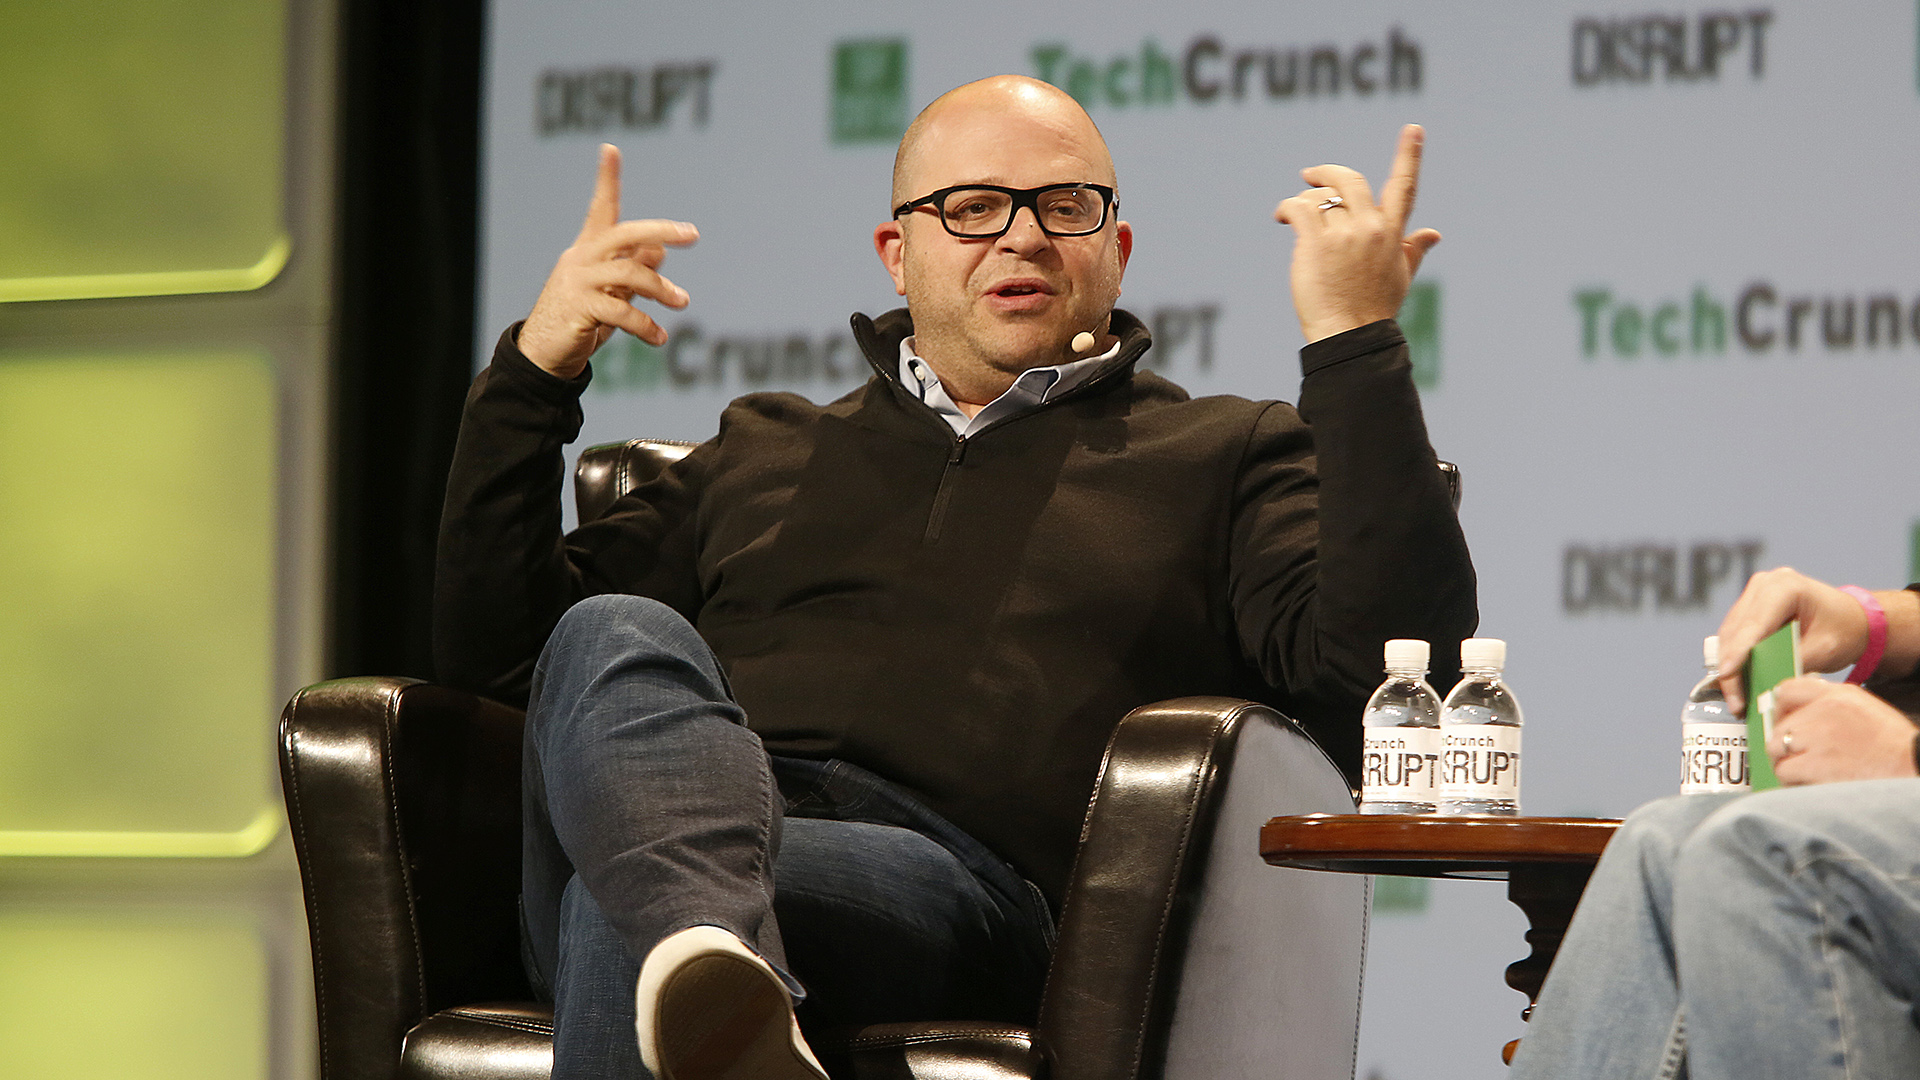 Jeff Lawson sits in an arm chair and gestures with both hands while speaking to another person seated by his side, in a room with a logo backdrop with wordmarks that read "TechCrunch" and "DISRUPT."